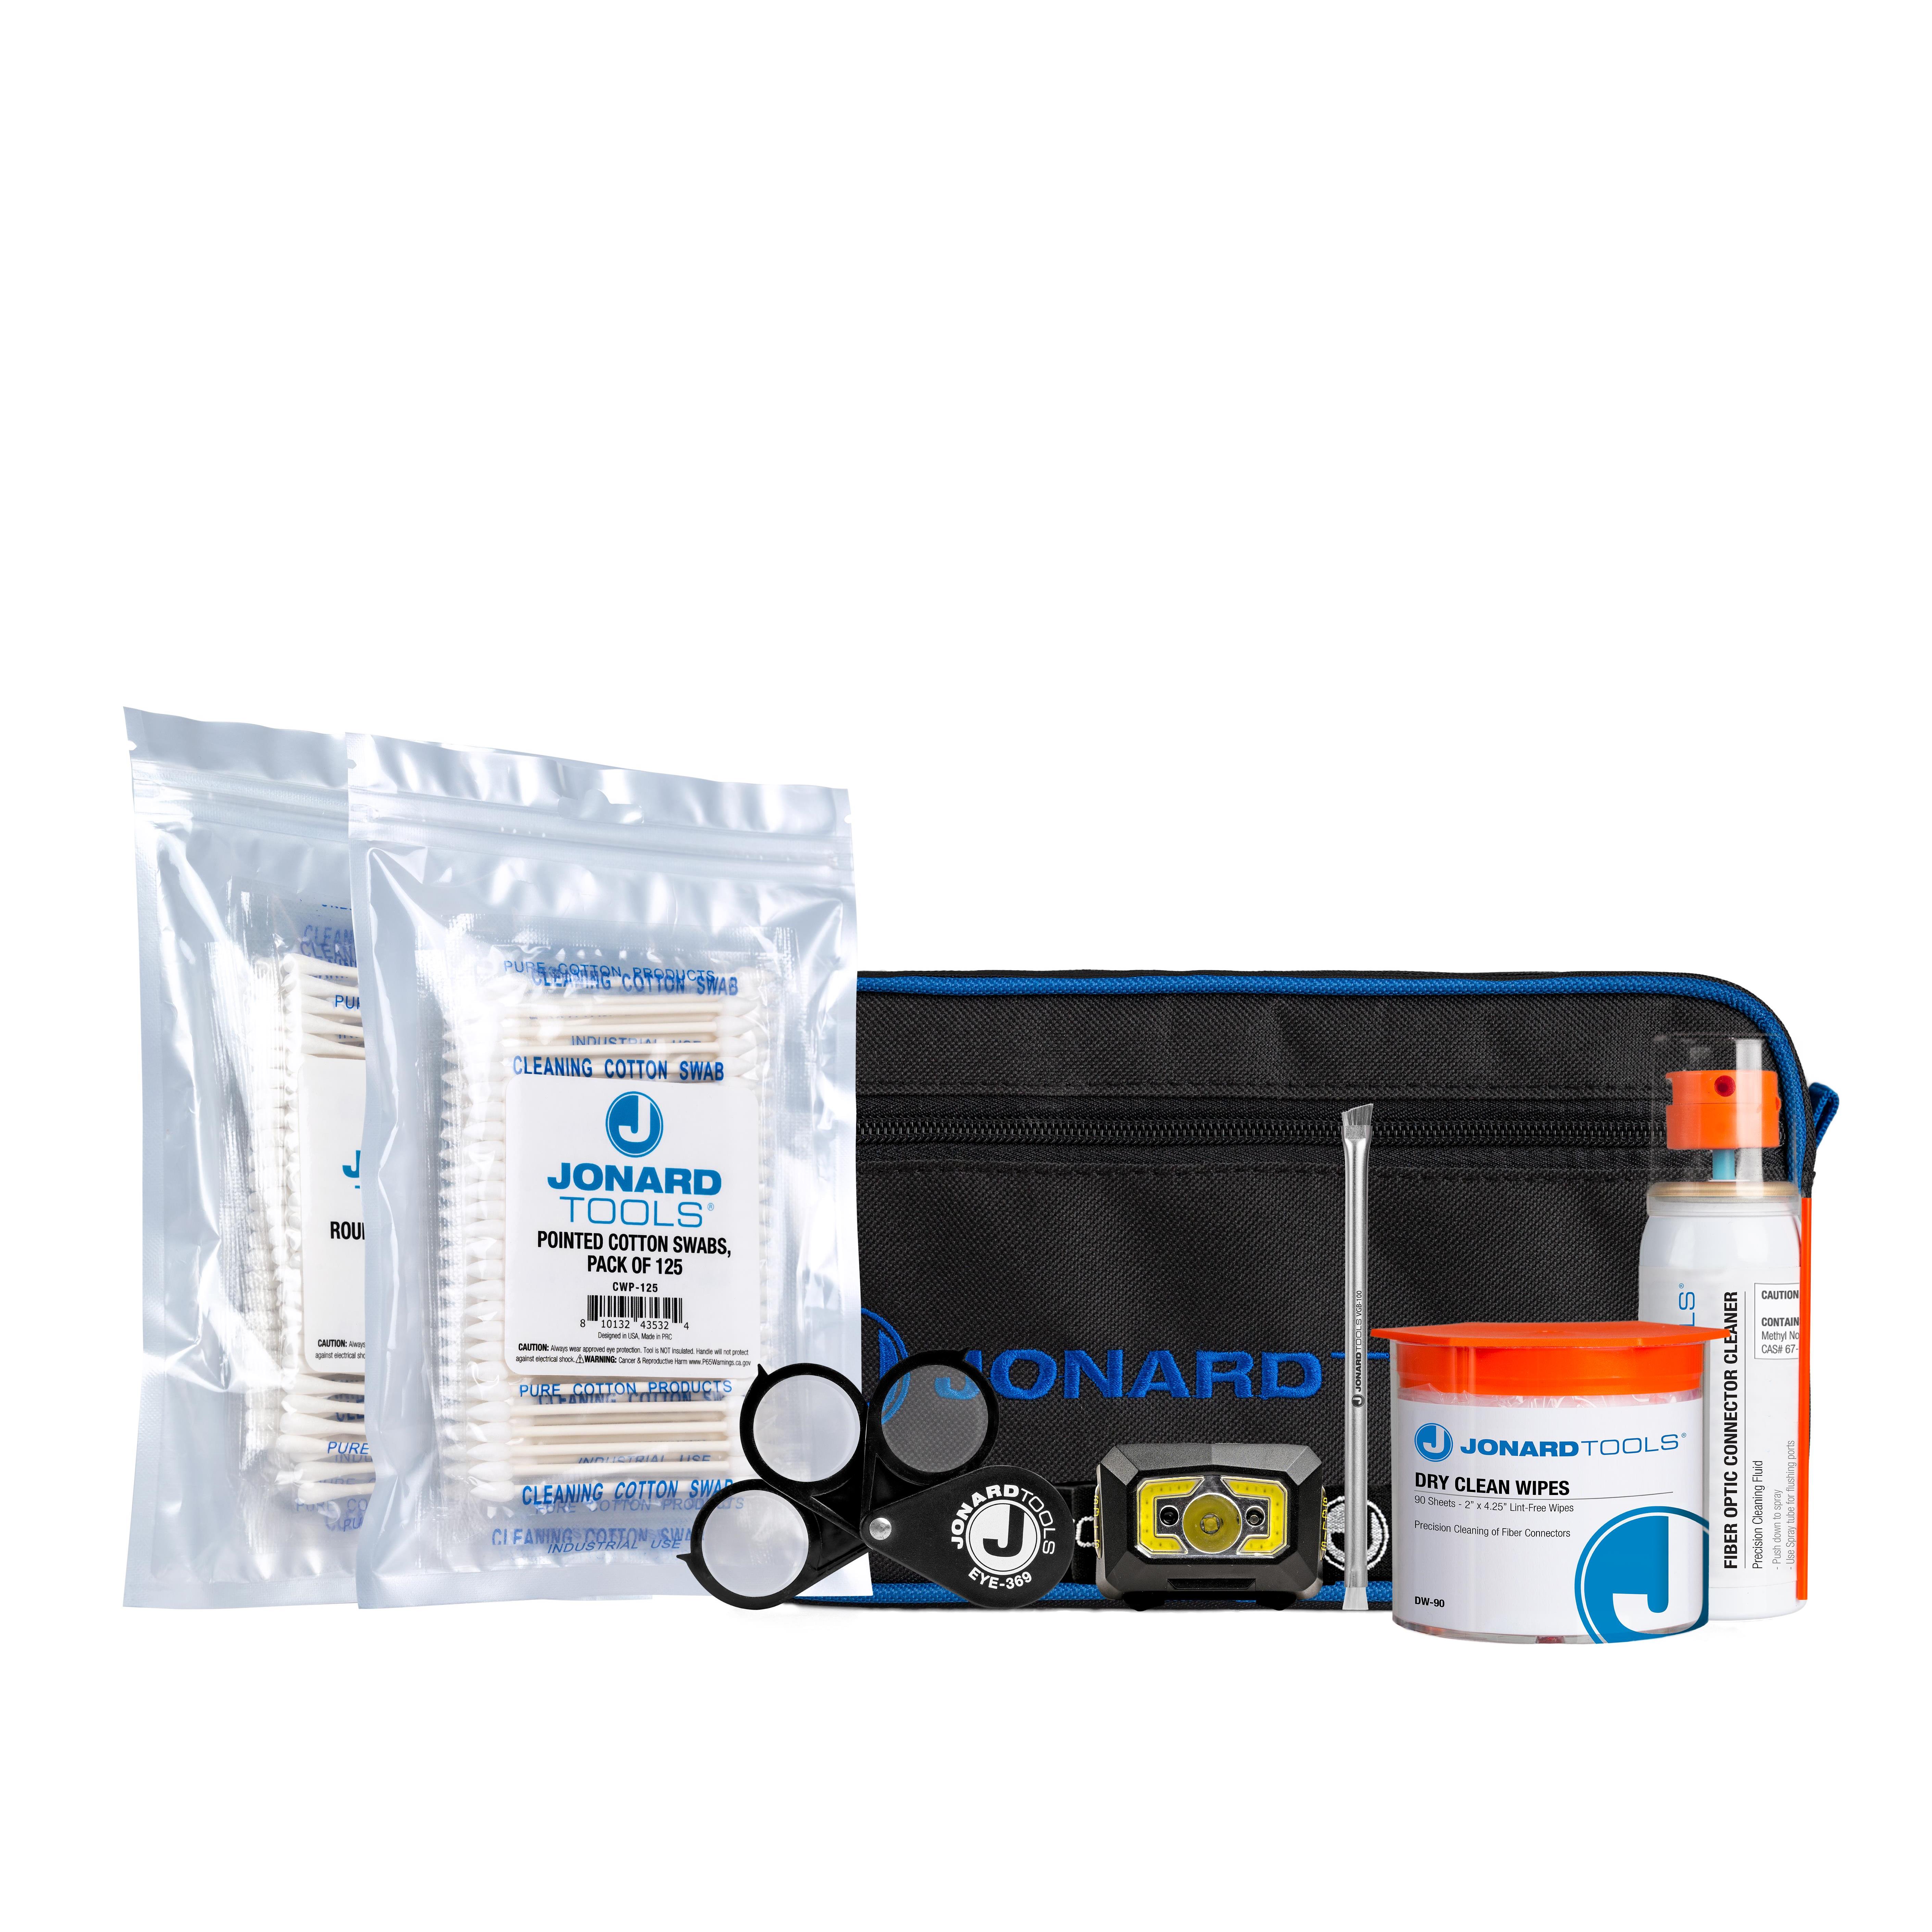 【TK-285】FUSION SPLICER CLEANING KIT